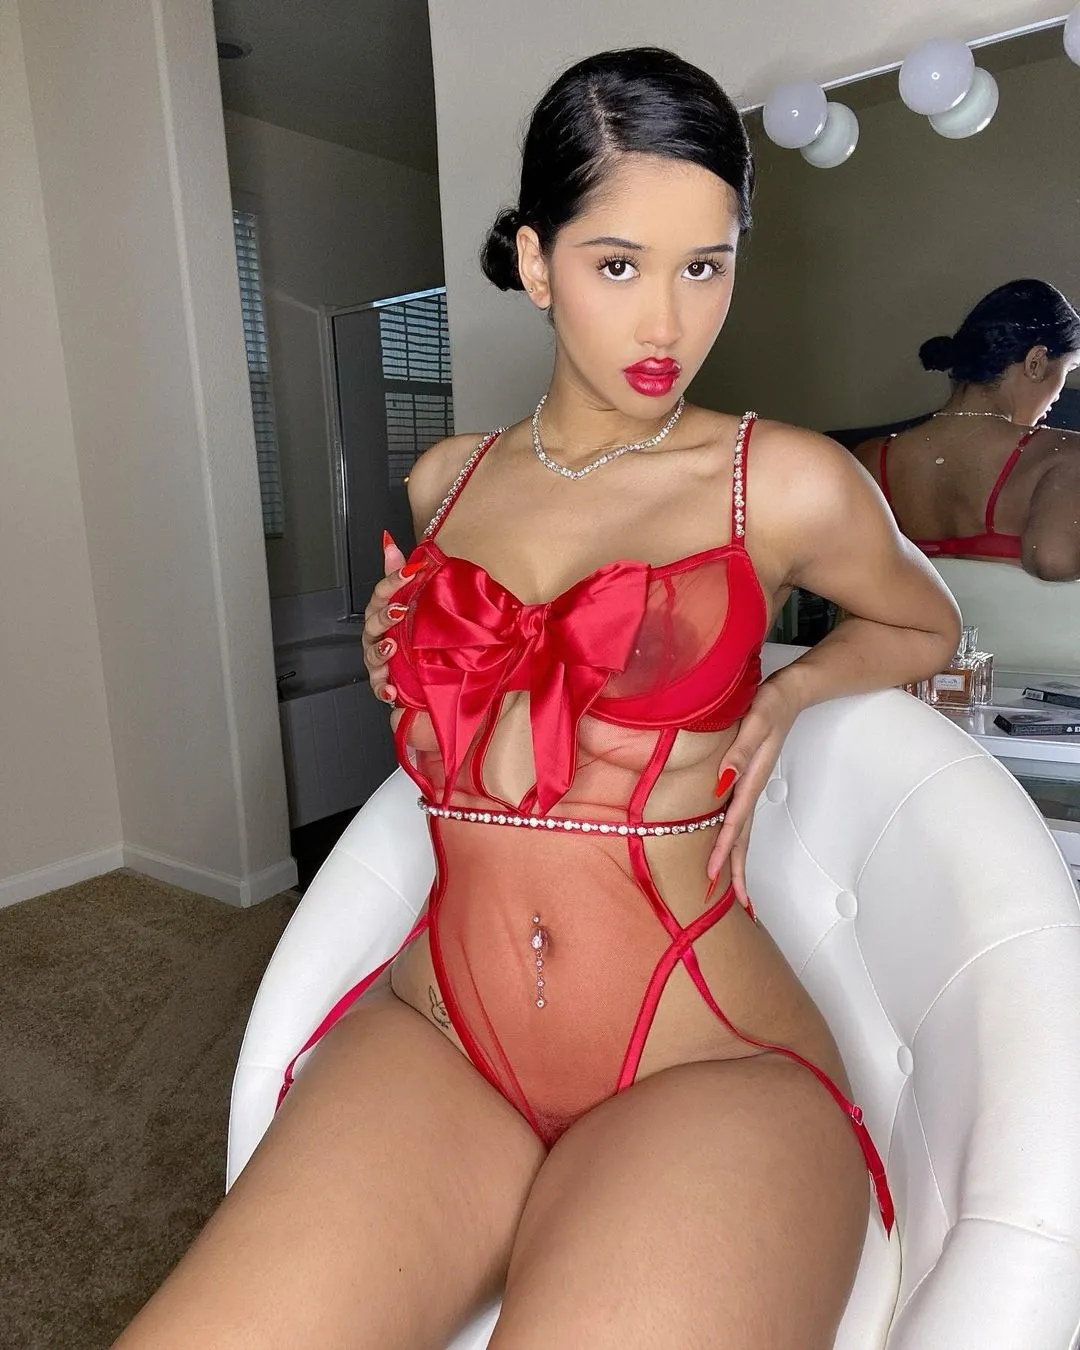 pia bunny only fans pia bunny leaked,pia bunny only fans,pia bunny xxx,Pia Bunny Onlyfans leak